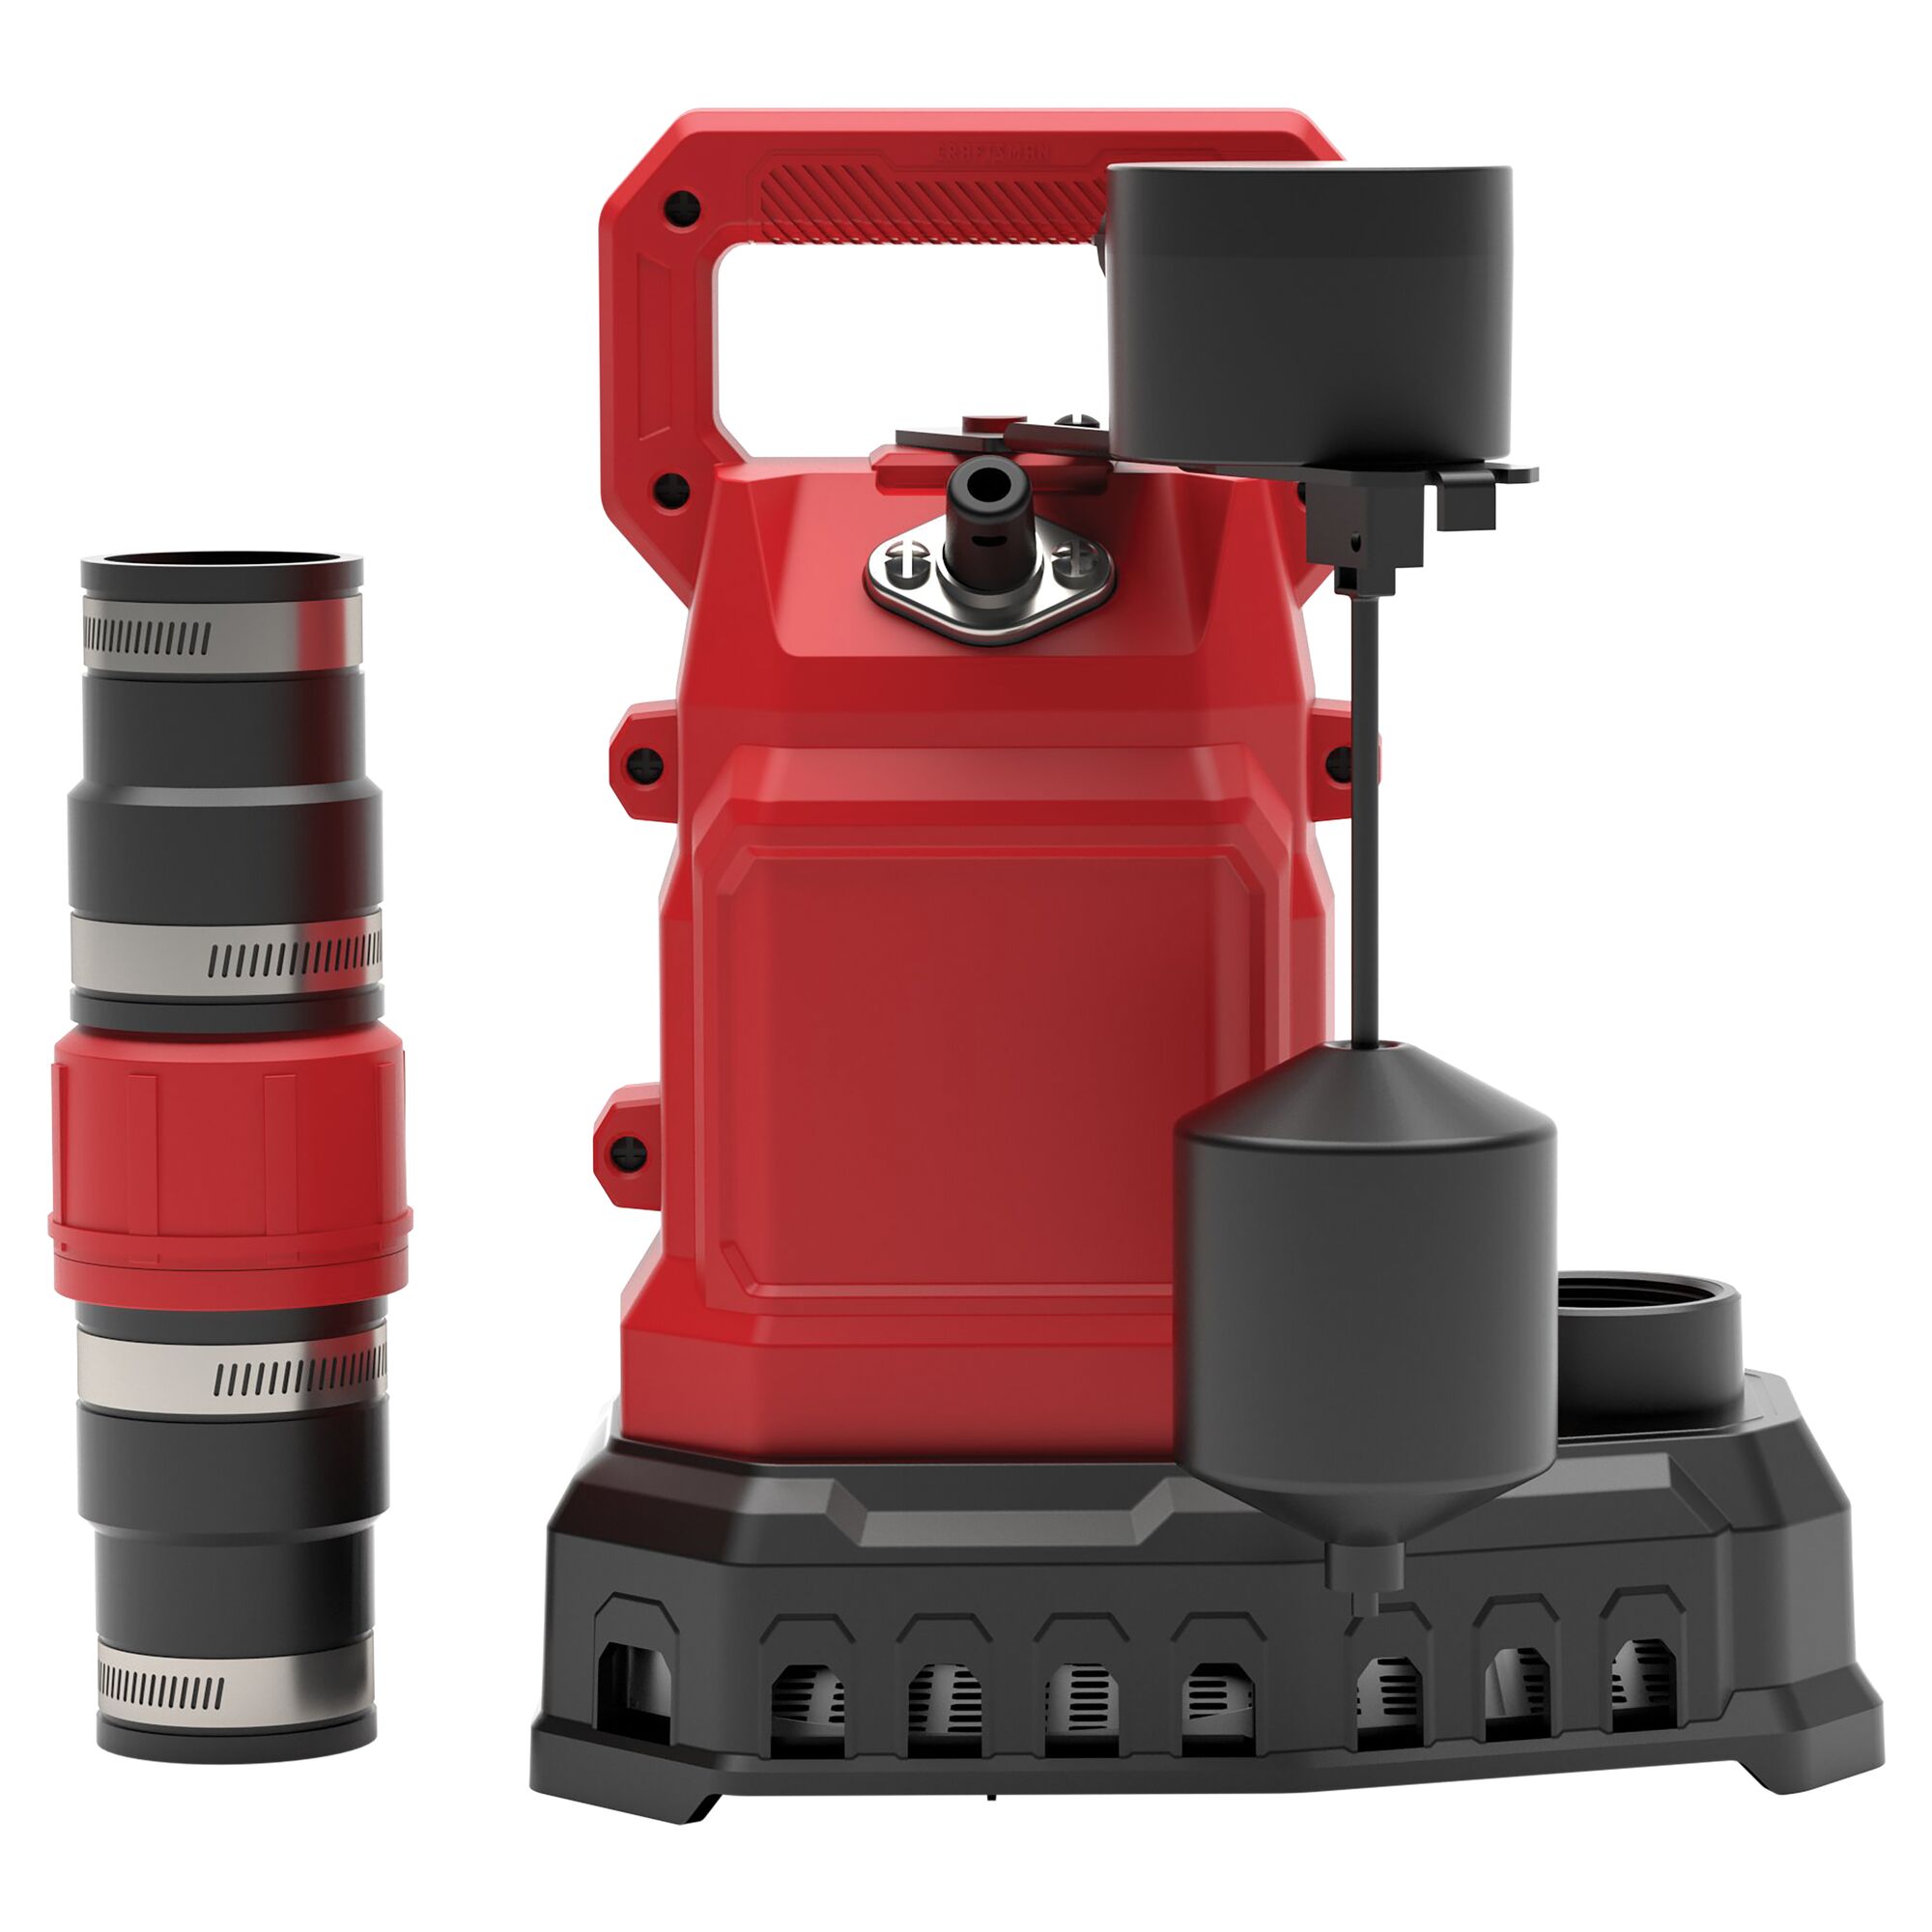 1-3HP SUMP PUMP REINFORCED THERMOPLASTIC SUBMERSIBLE AUTOMATIC VERTICAL SWITCH INCLUDES CHECK VALVE BACK VIEW